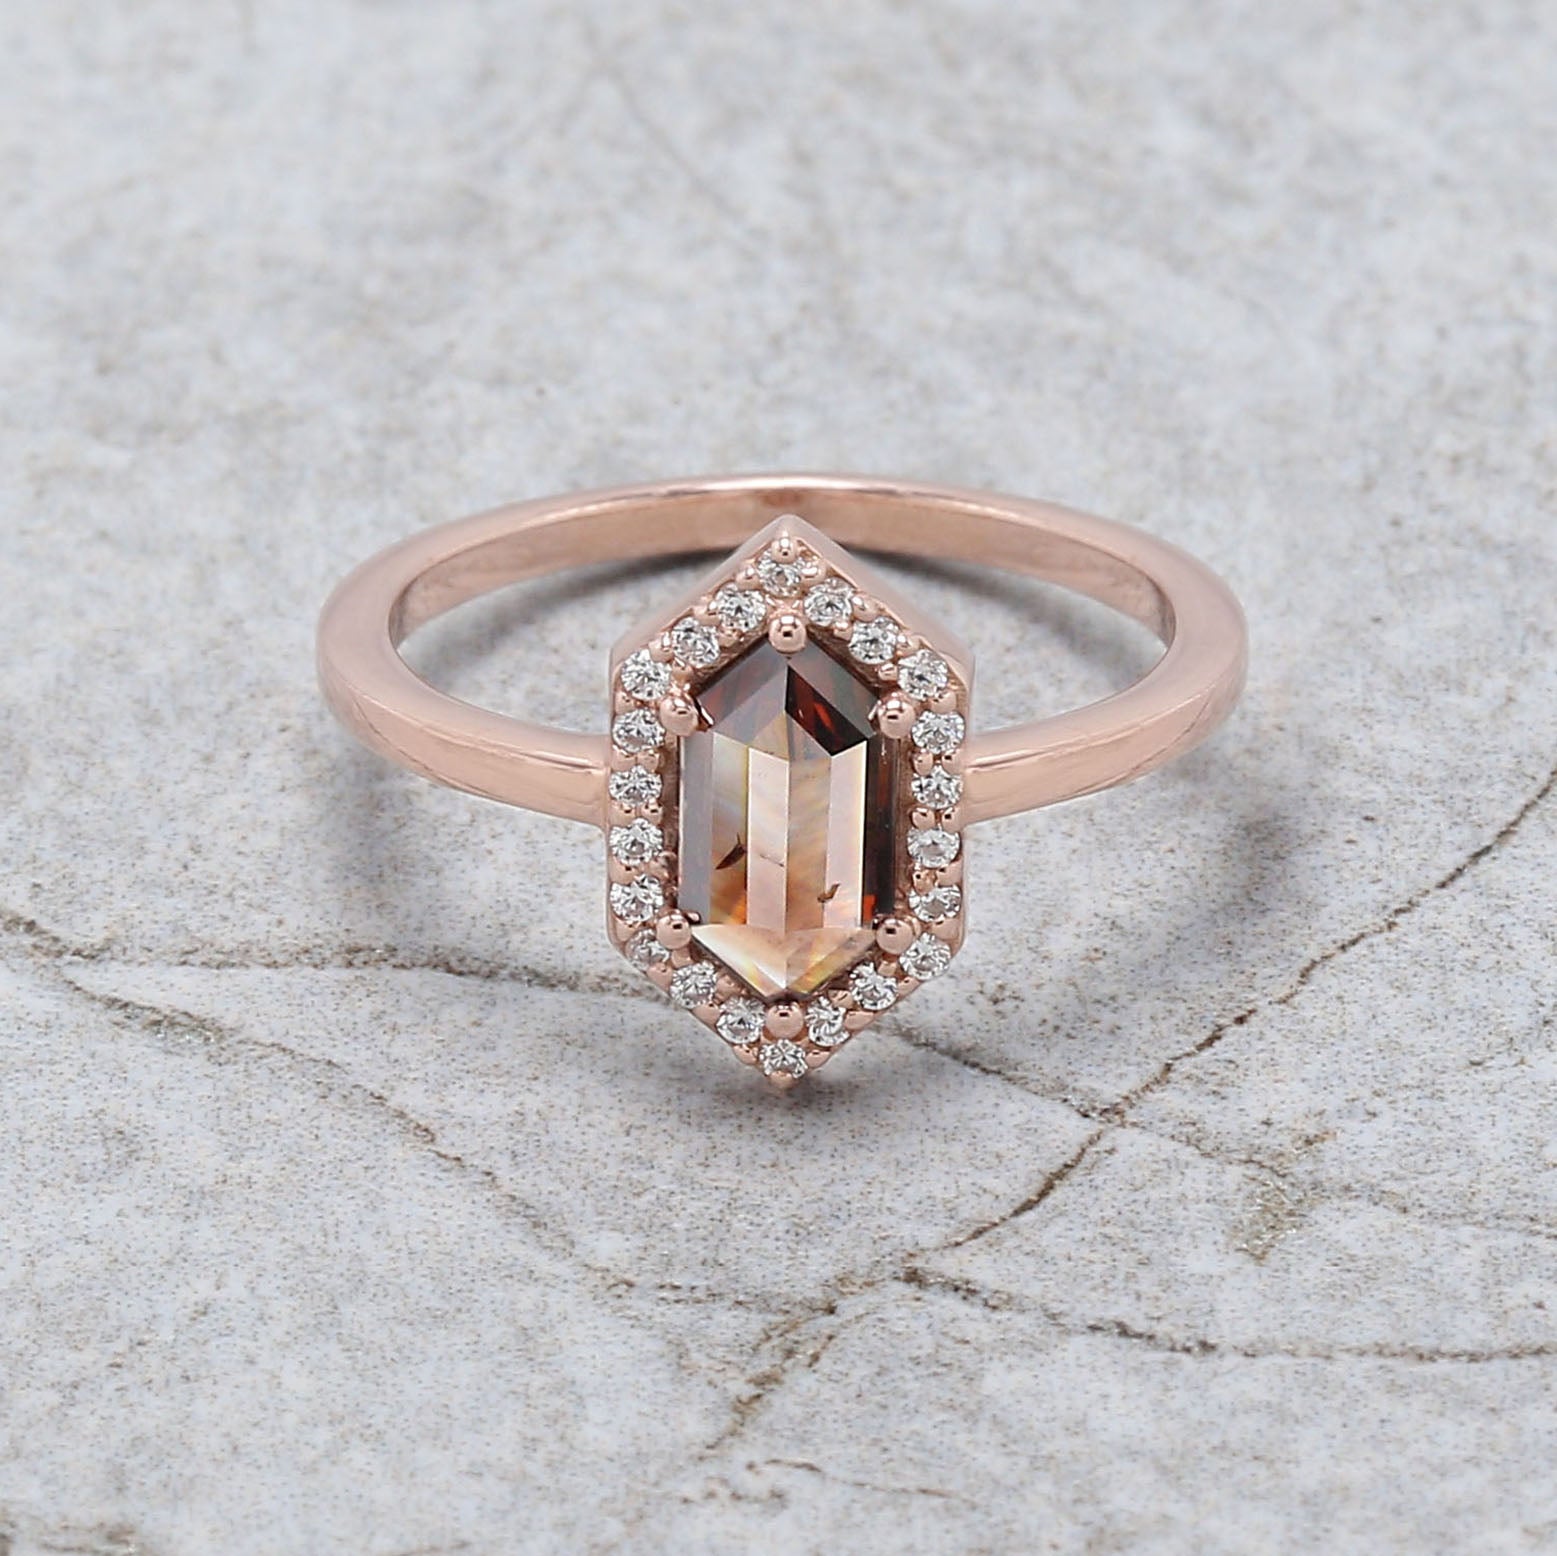 Hexagon Brown Color Diamond Ring 0.65 Ct 8.05 MM Hexagon Shape Diamond Ring 14K Solid Rose Gold Silver Engagement Ring Gift For Her QL1861